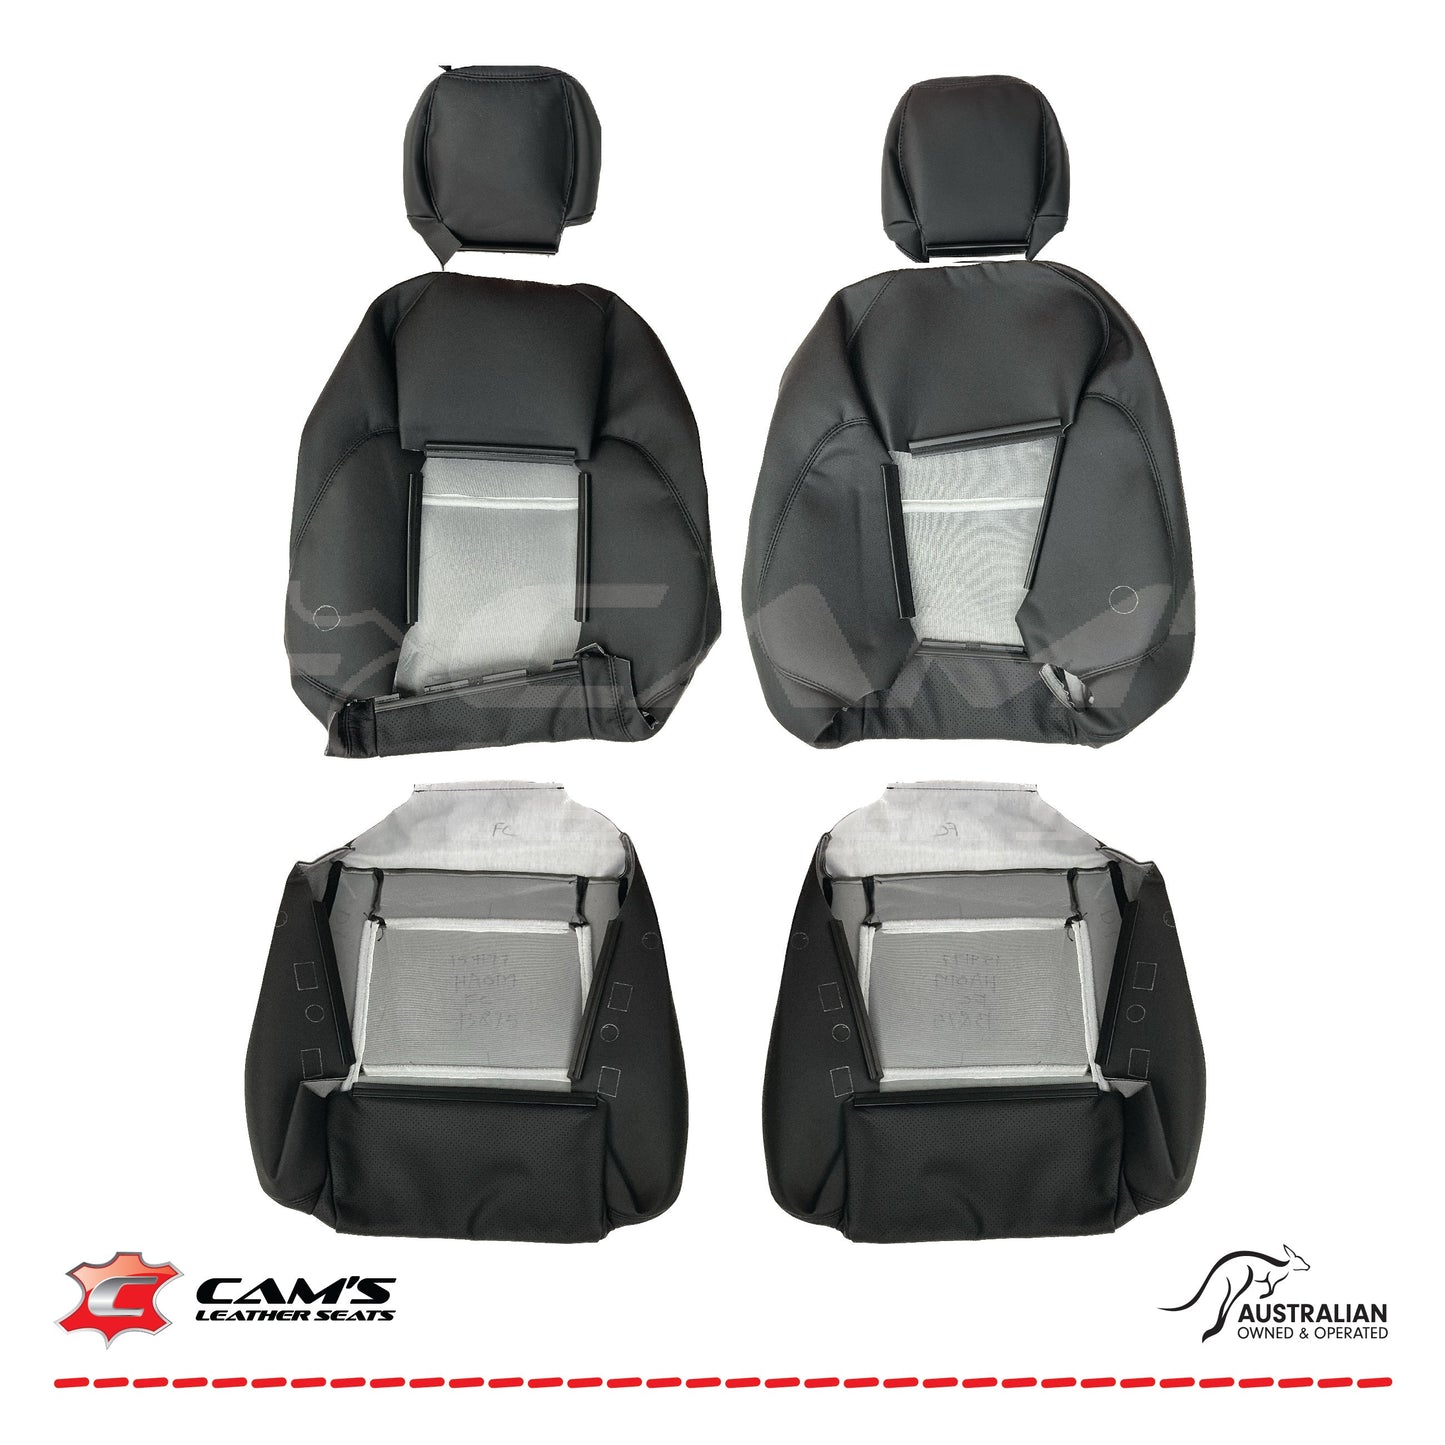 LEATHER SEATS TRIM KIT FOR HOLDEN VY S2 / VZ SS CREWMAN ANTHRACITE BLACK